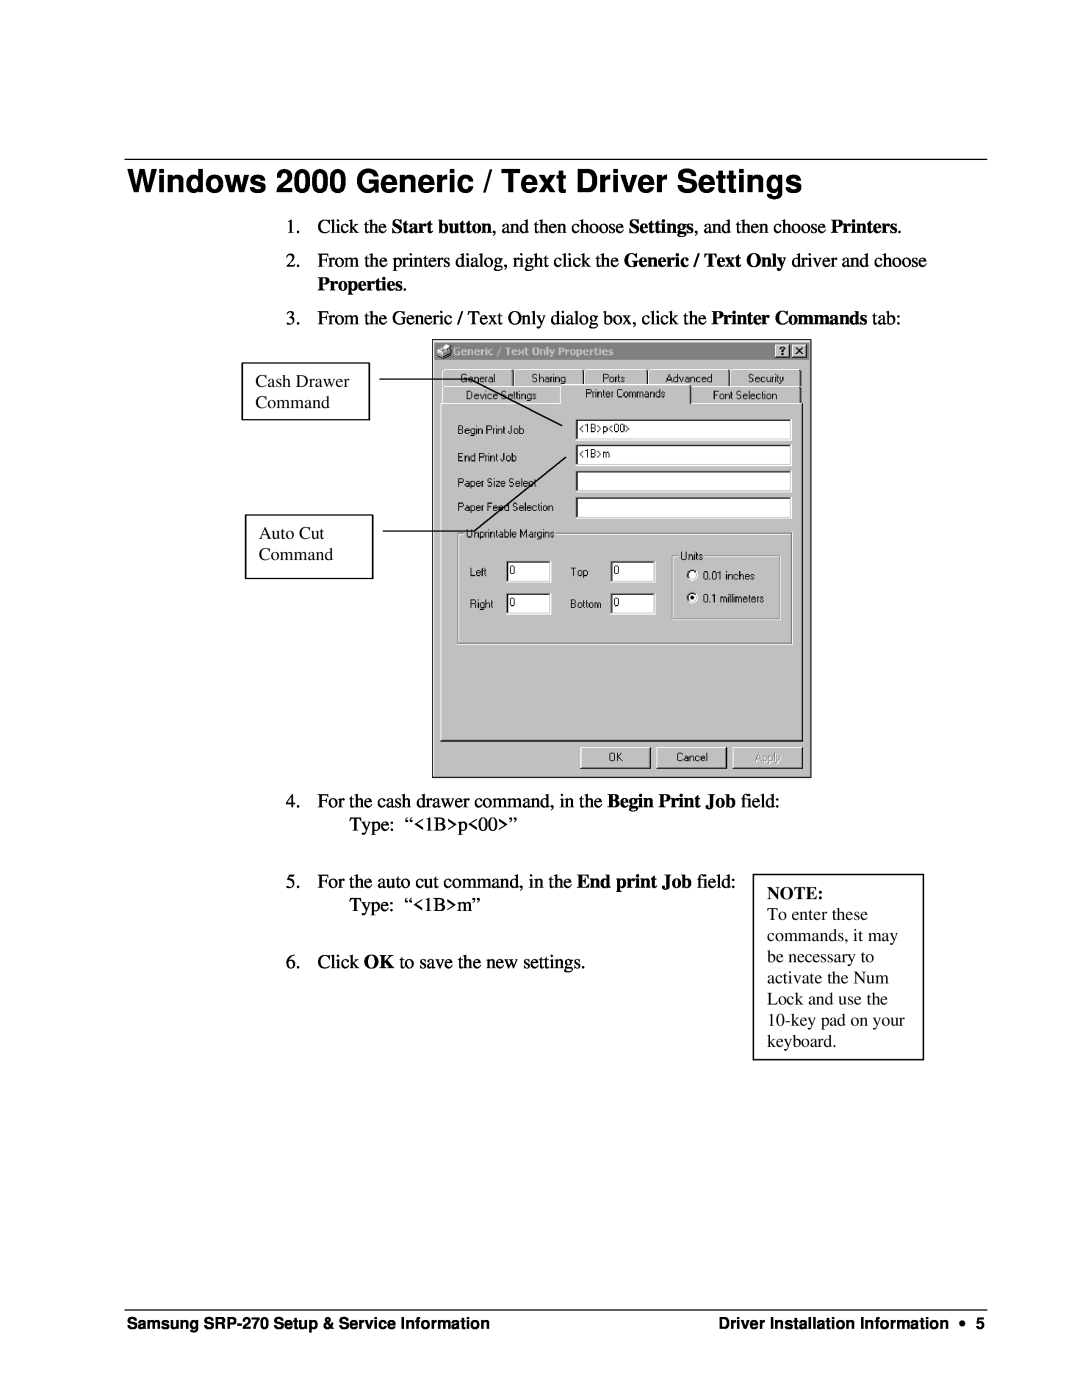 Samsung SRP-270 specifications Windows 2000 Generic / Text Driver Settings 